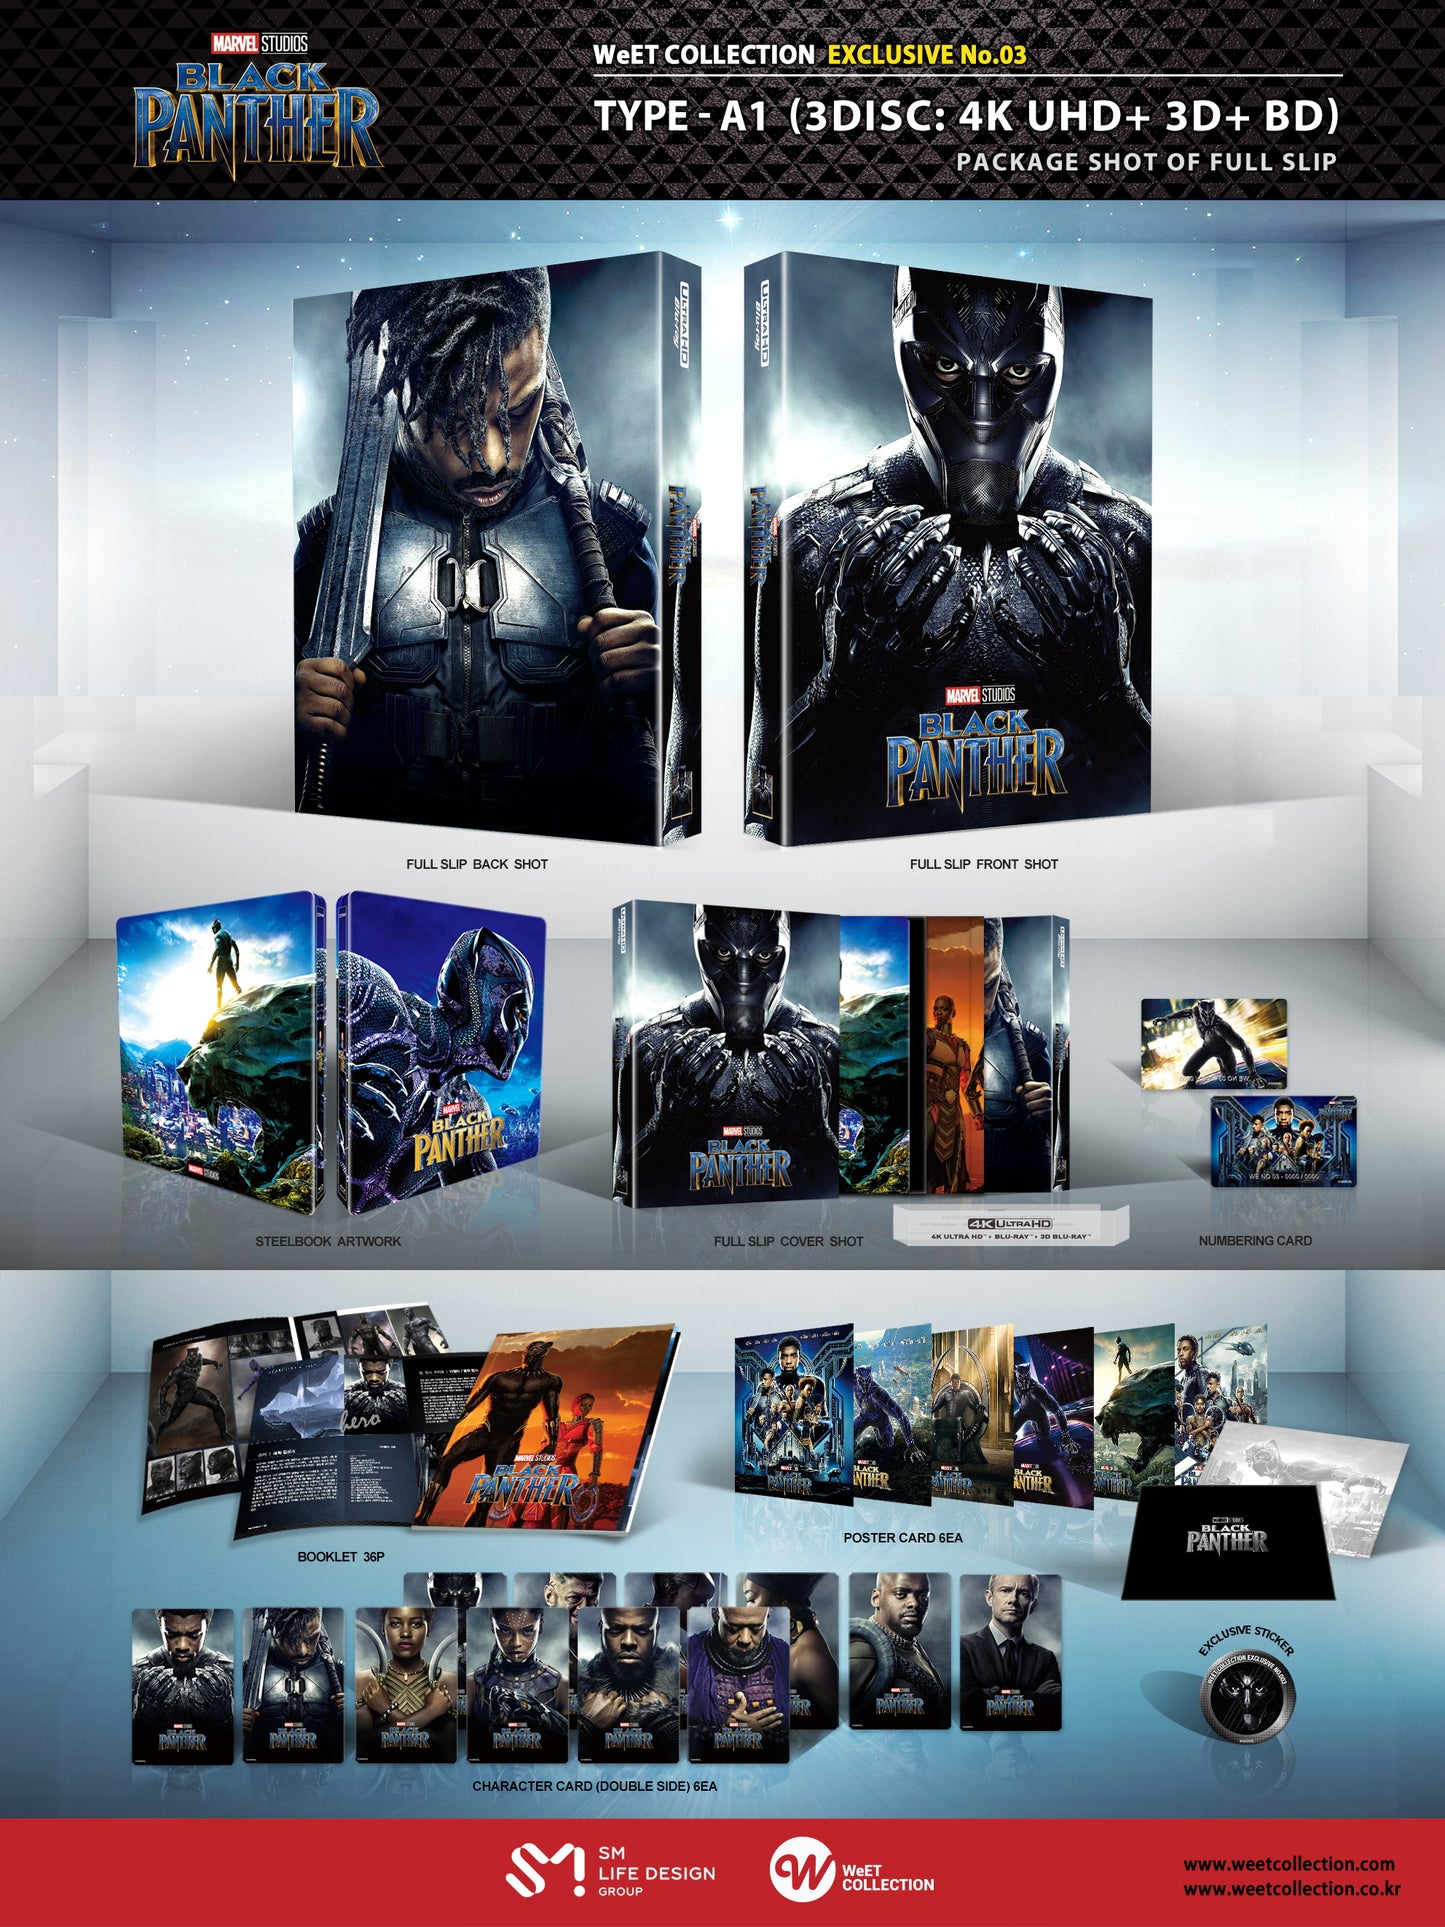 Black Panther (4K UHD + 3D + 2D Blu-Ray) Steelbook WEET Collection Full Slip A1